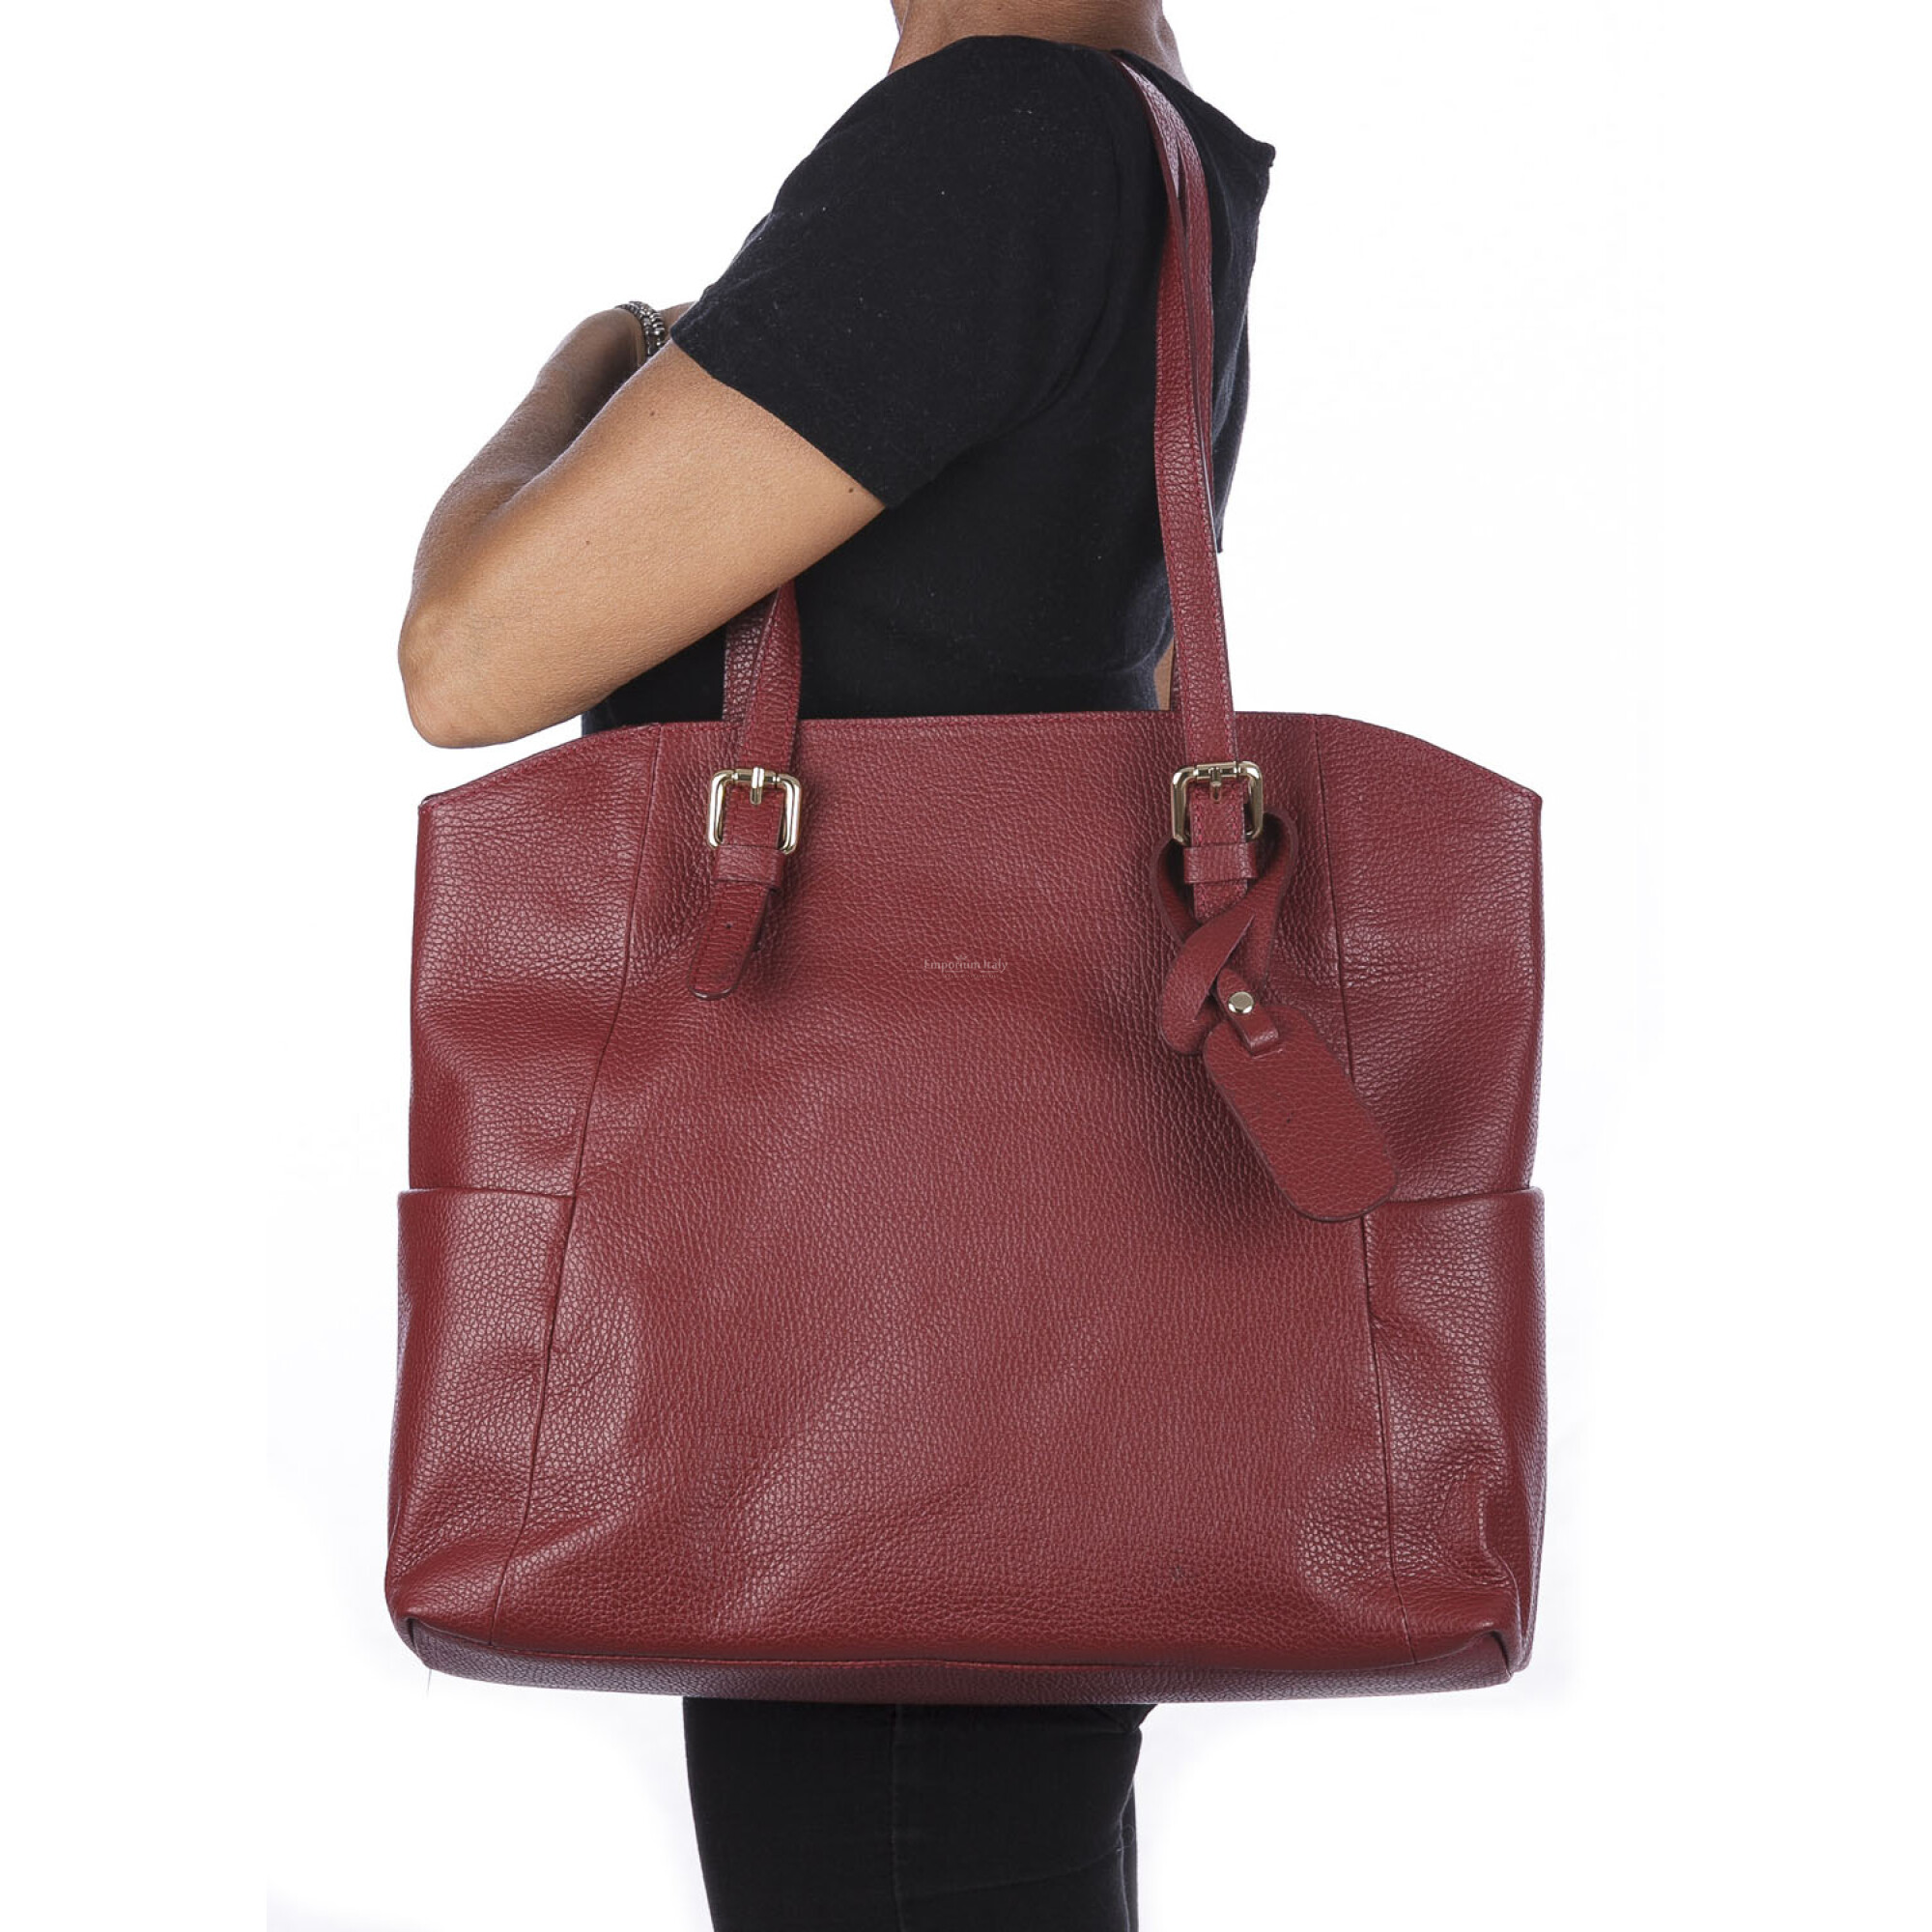 Genuine Leather Woman Bag Color Red 